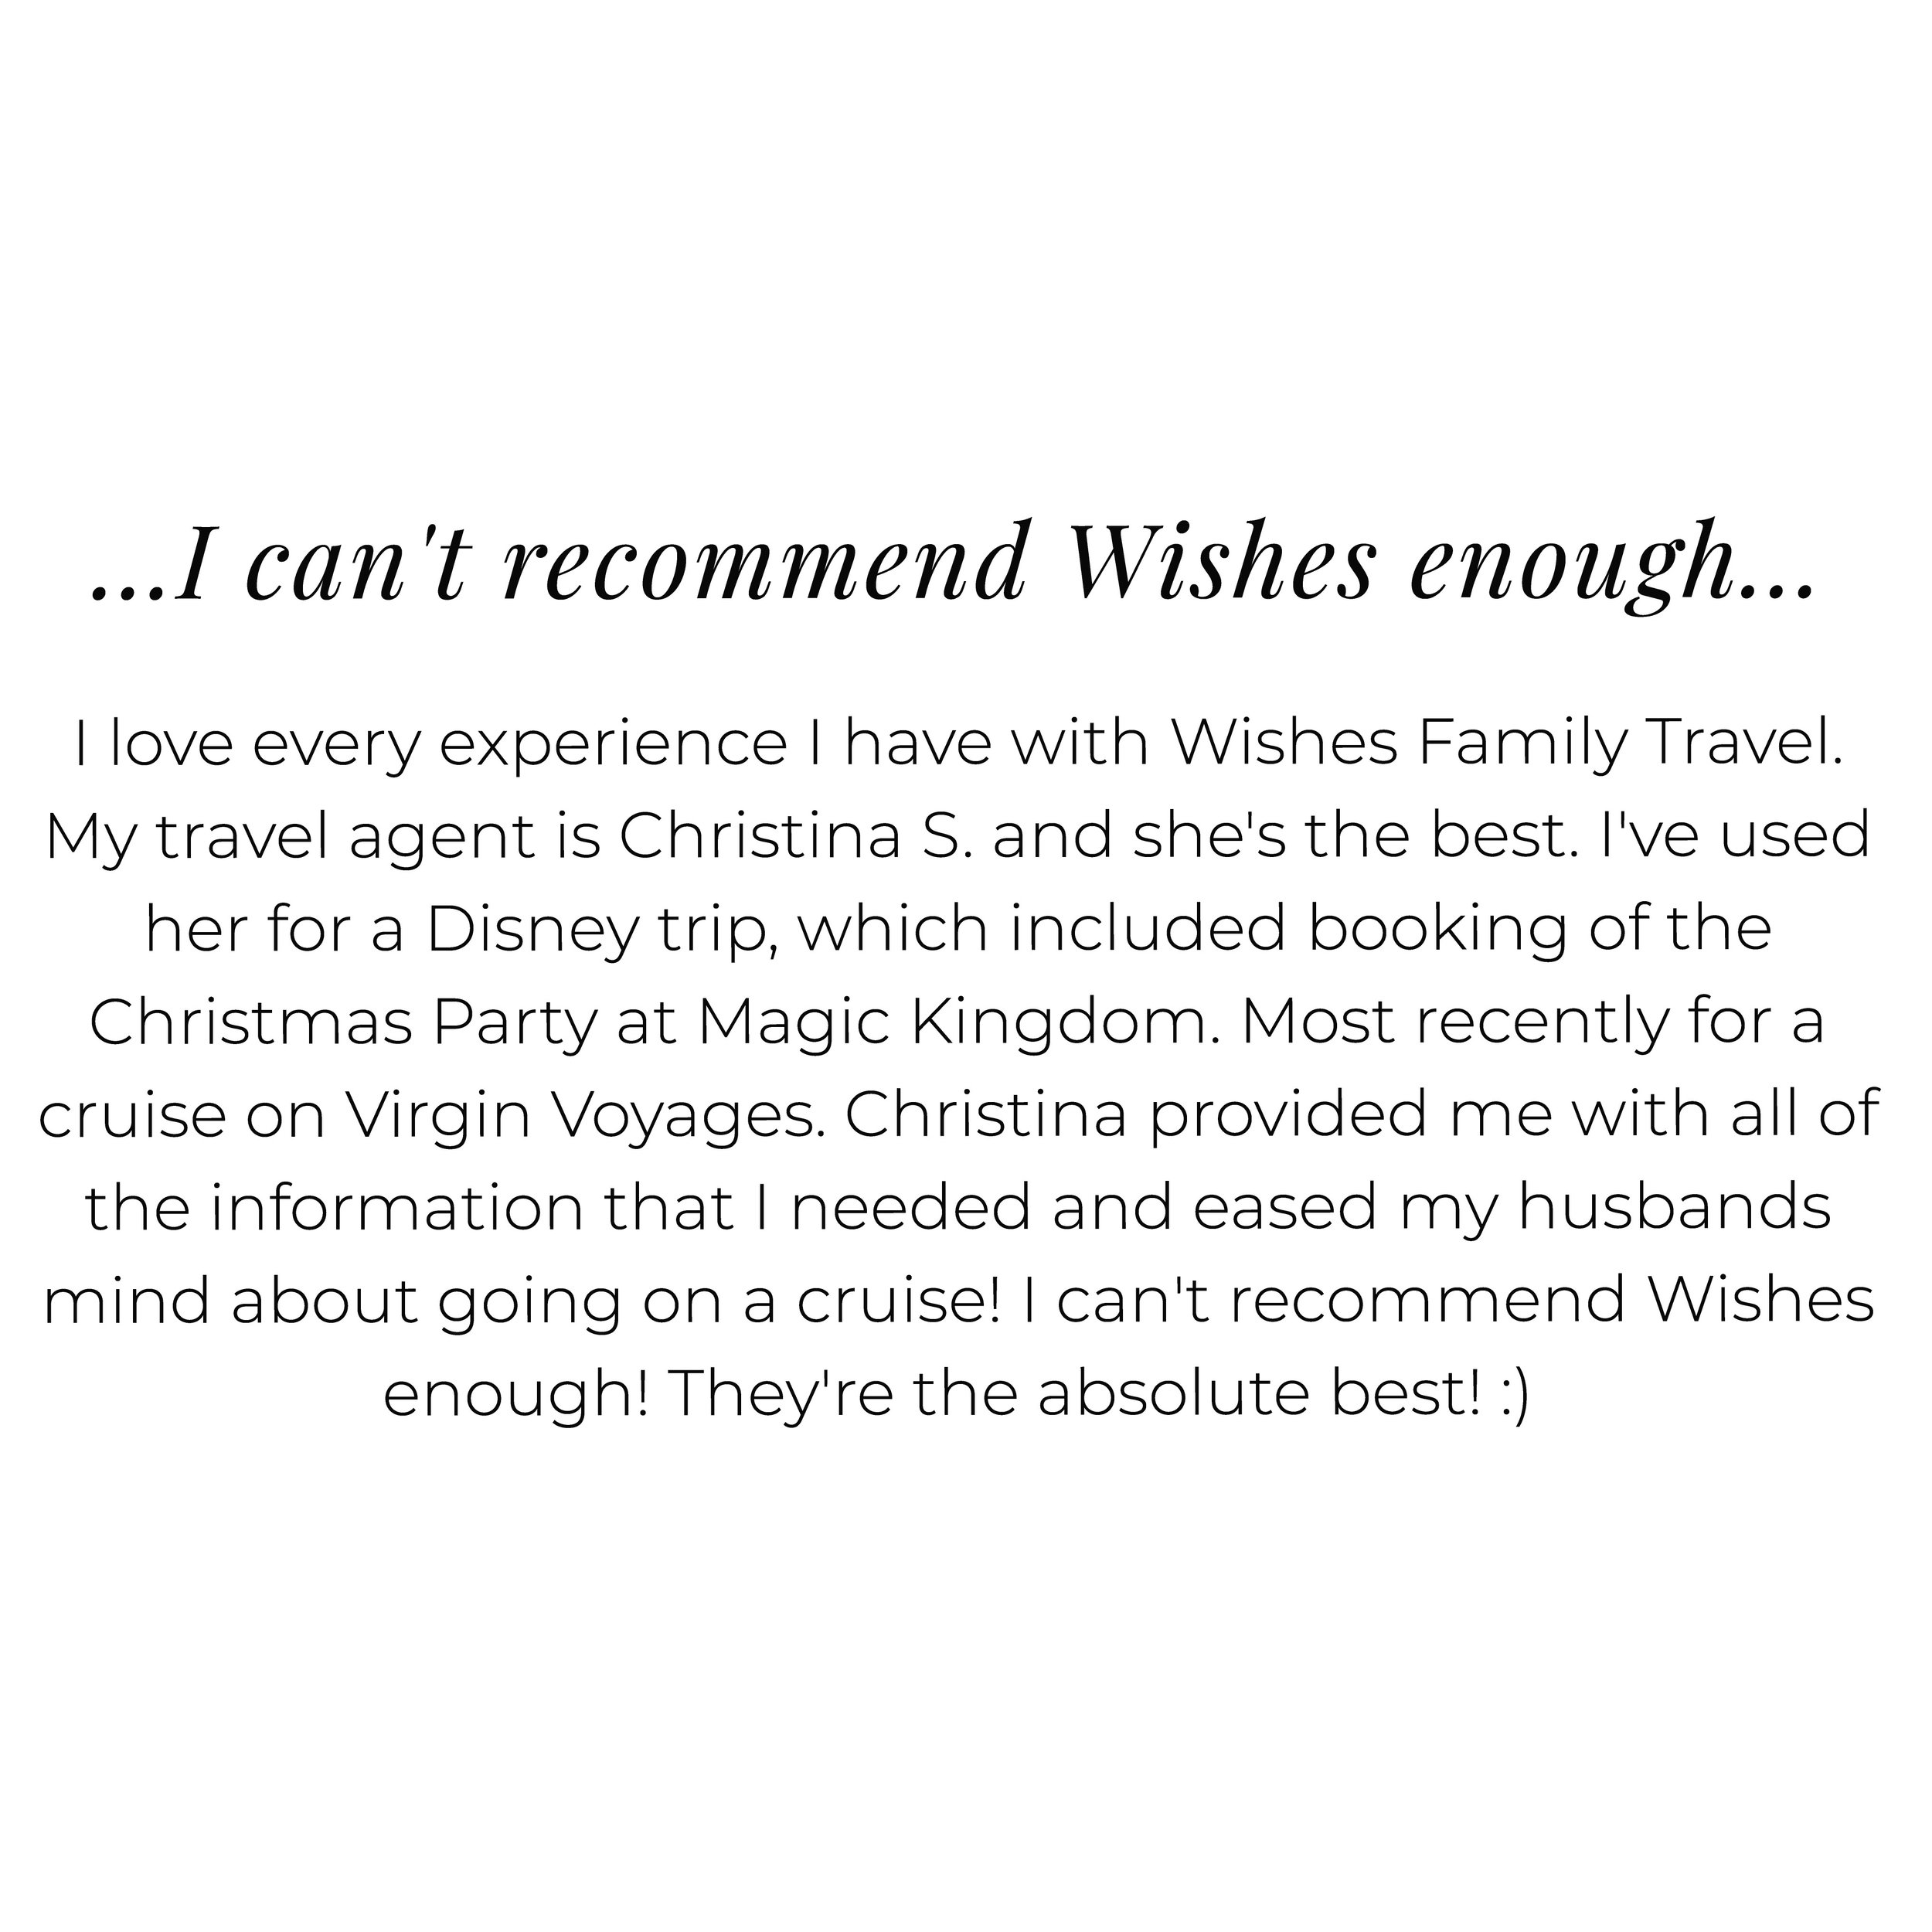 Wishes_Testimonials_mobile_0008s_0000_…I can't recommend Wishes enough… I love every experience I hav.jpg